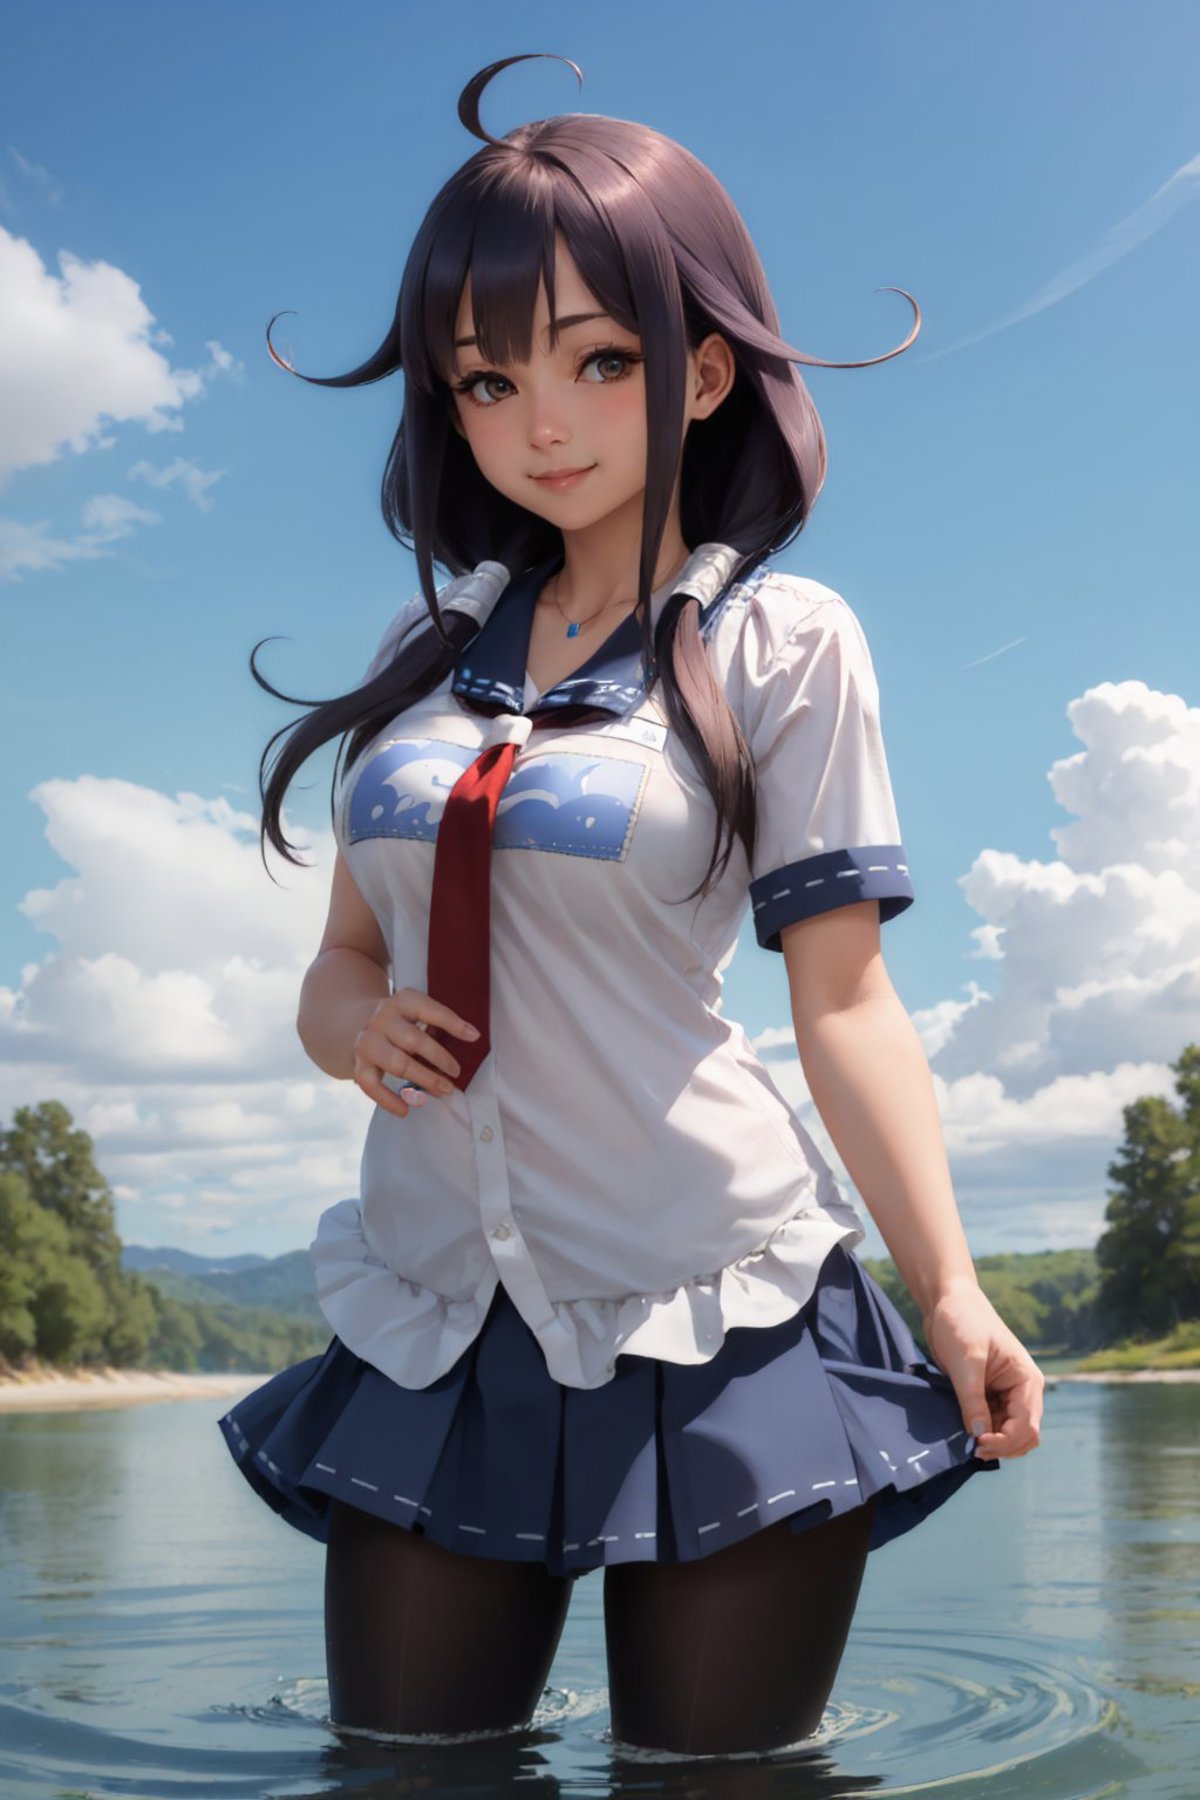 Taigei | Kantai Collection image by justTNP